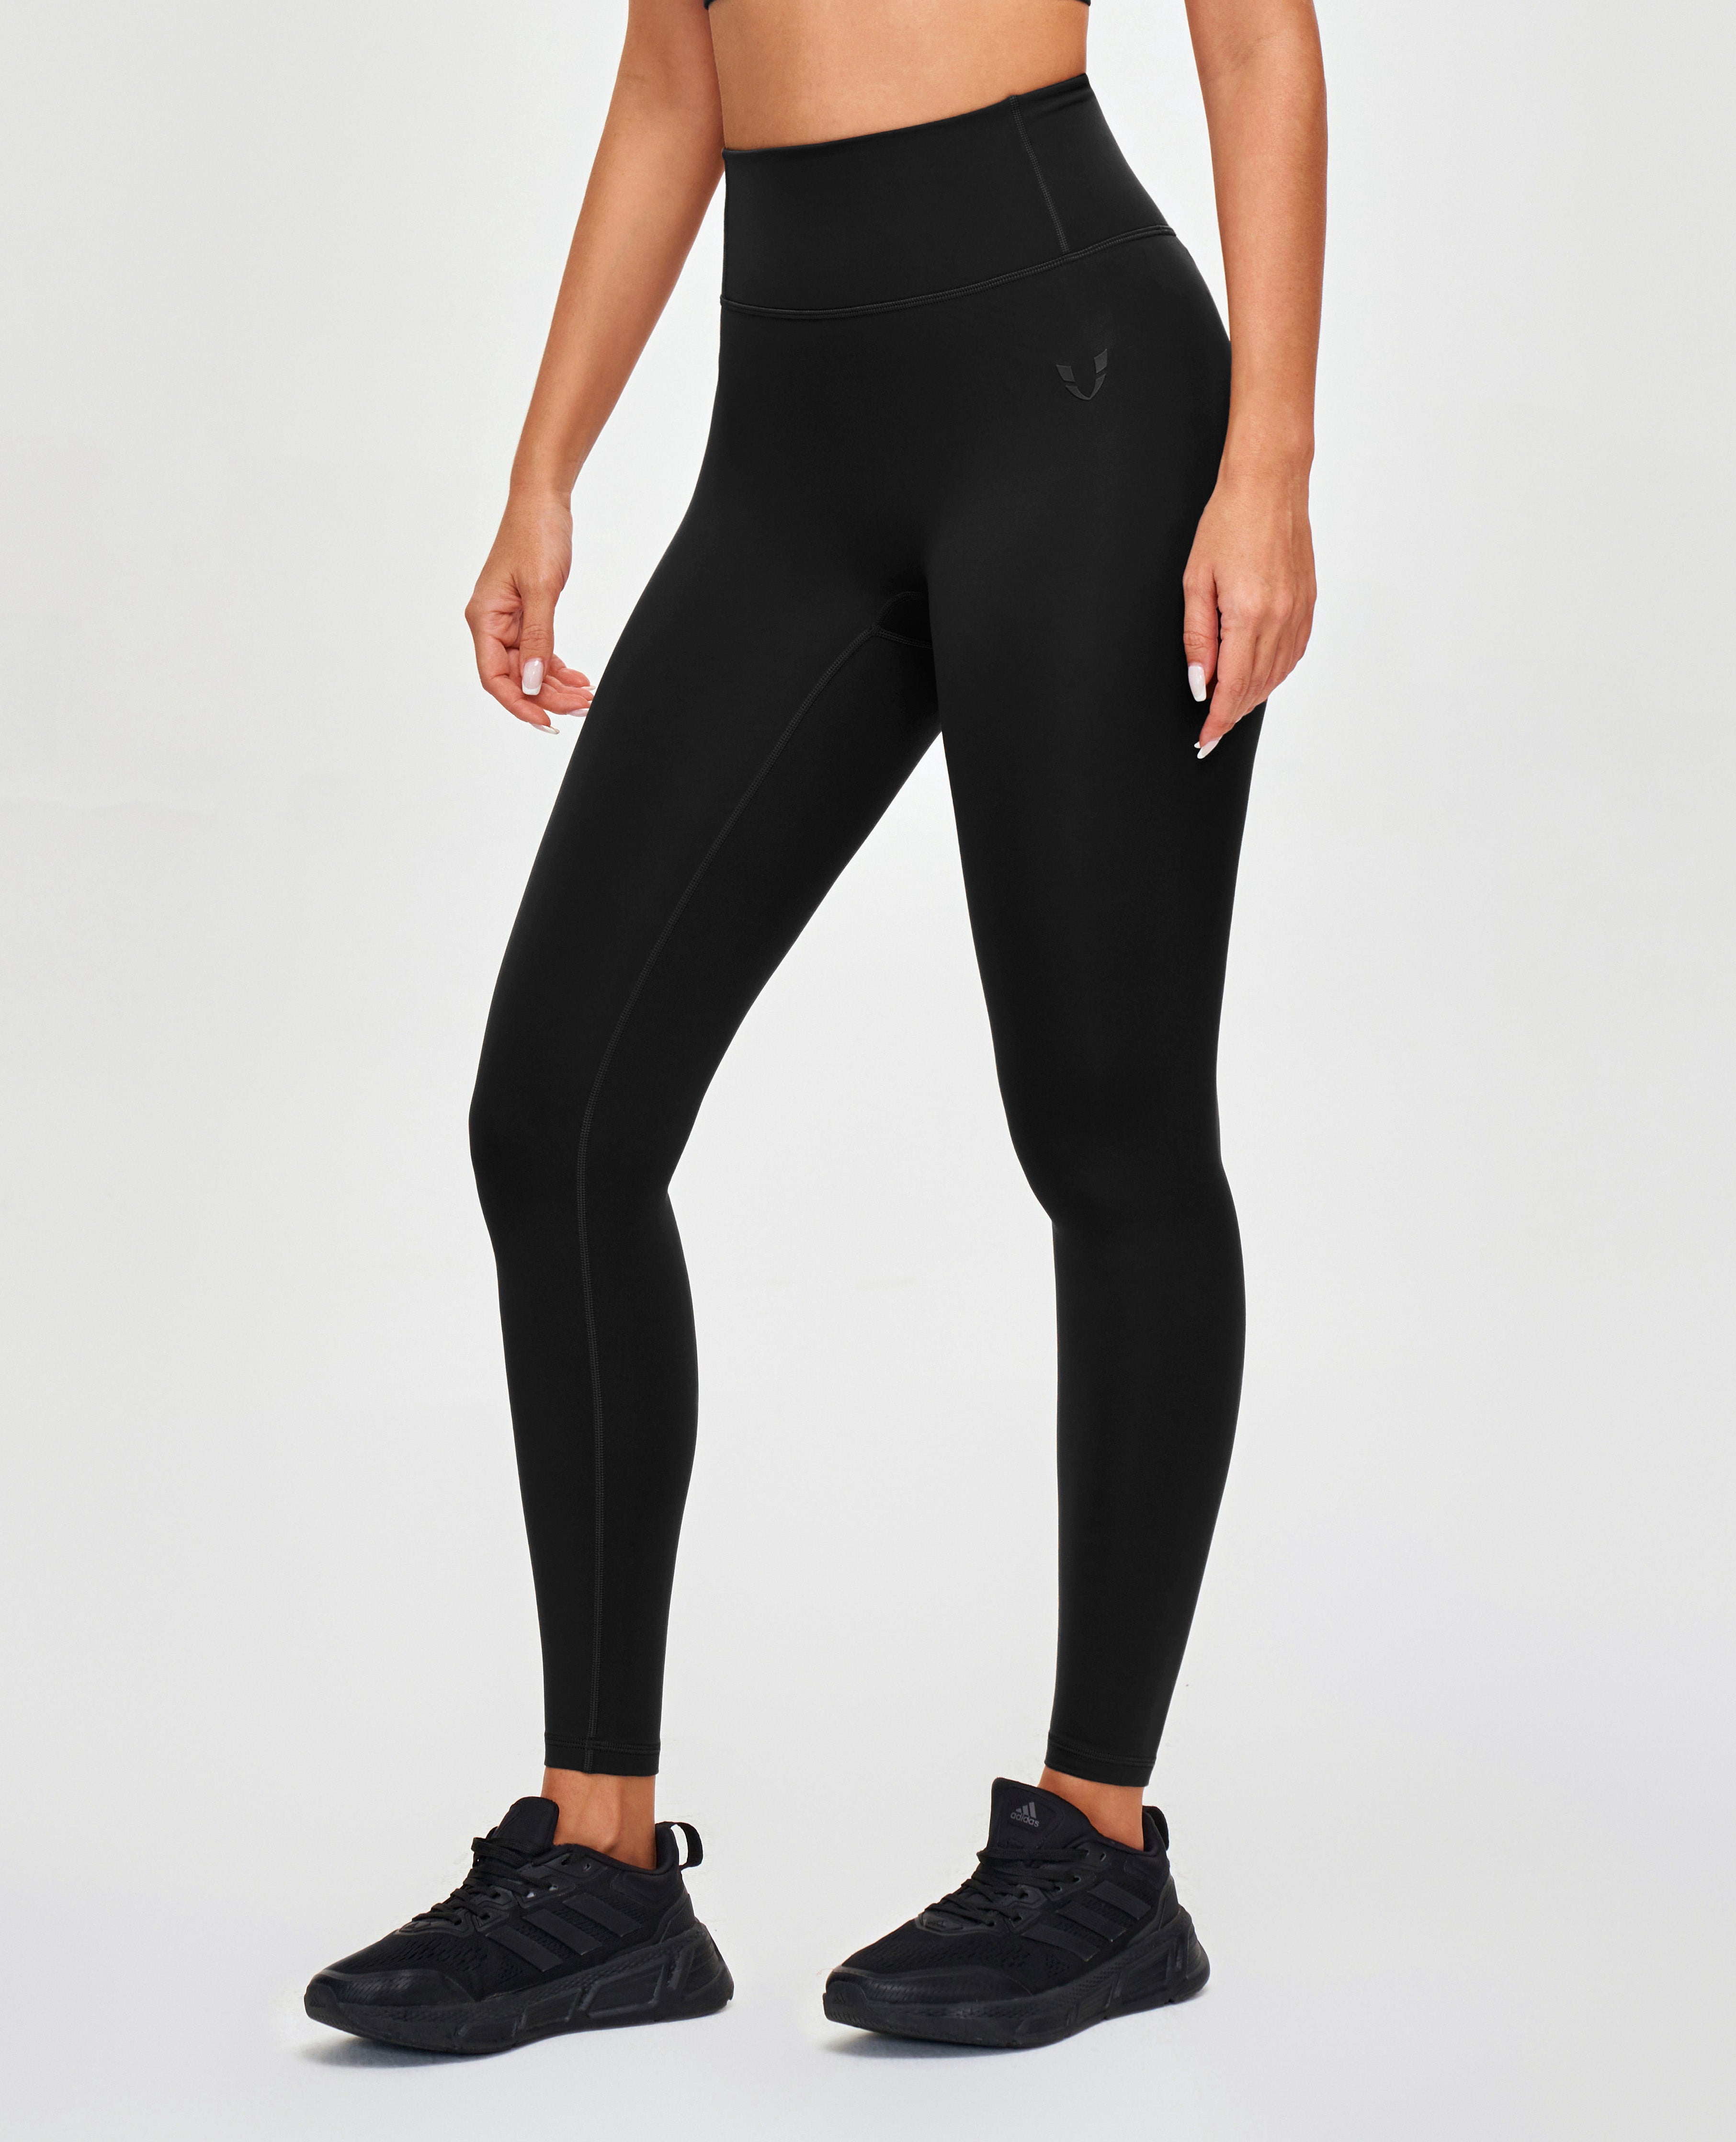 FIRMABS: Our Best Price Leggings, NEW ARRIVALS, FIRM ABS Sportswear